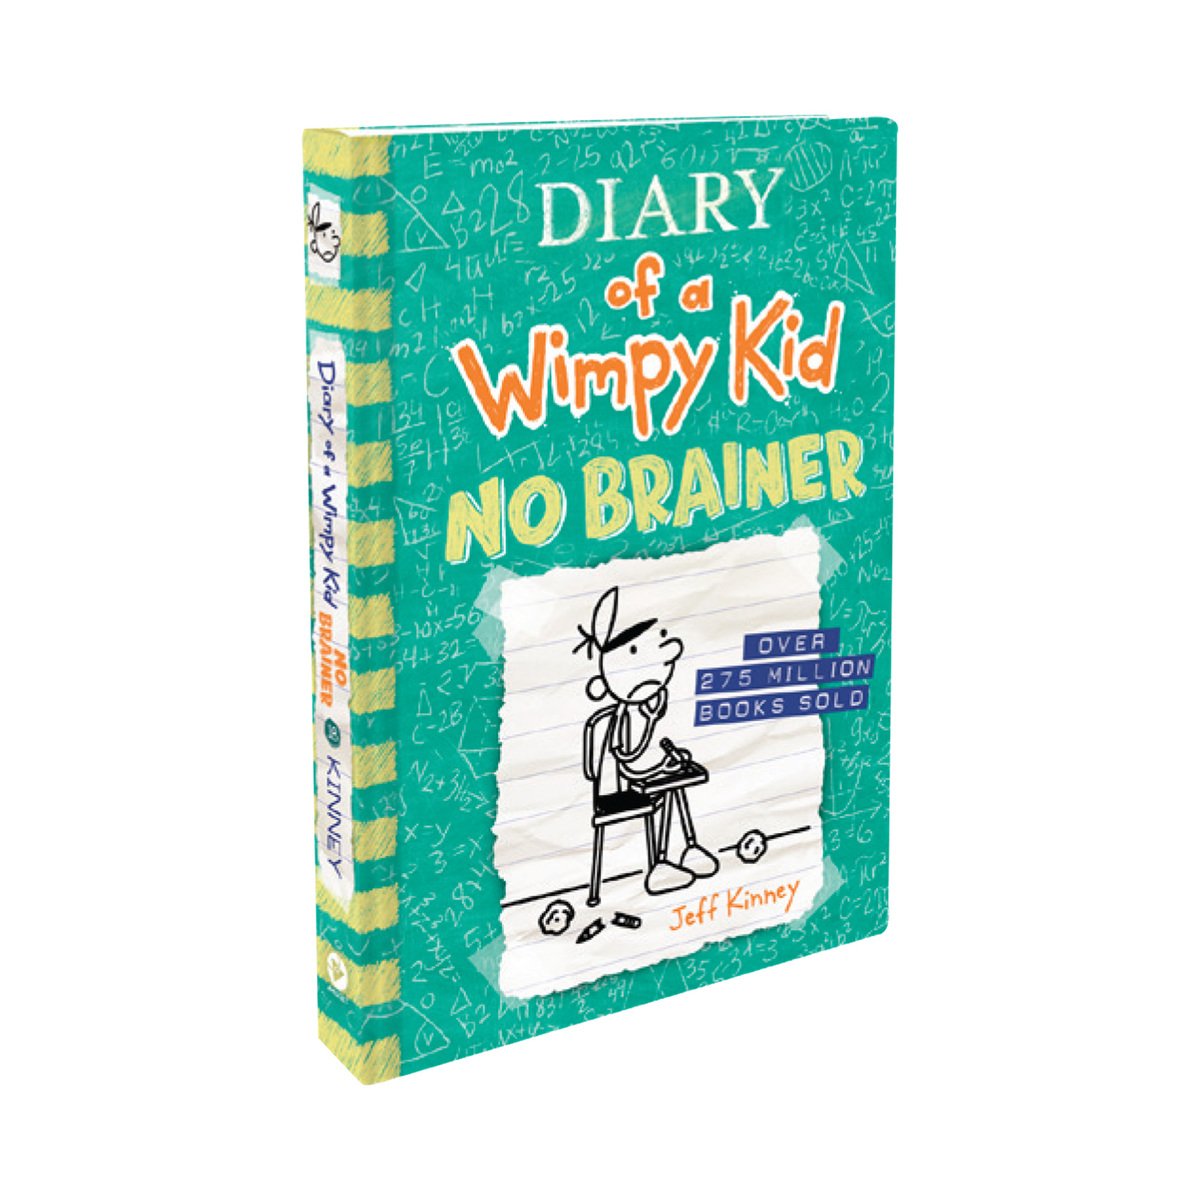 Wimpy Kids Story Book No Brainer